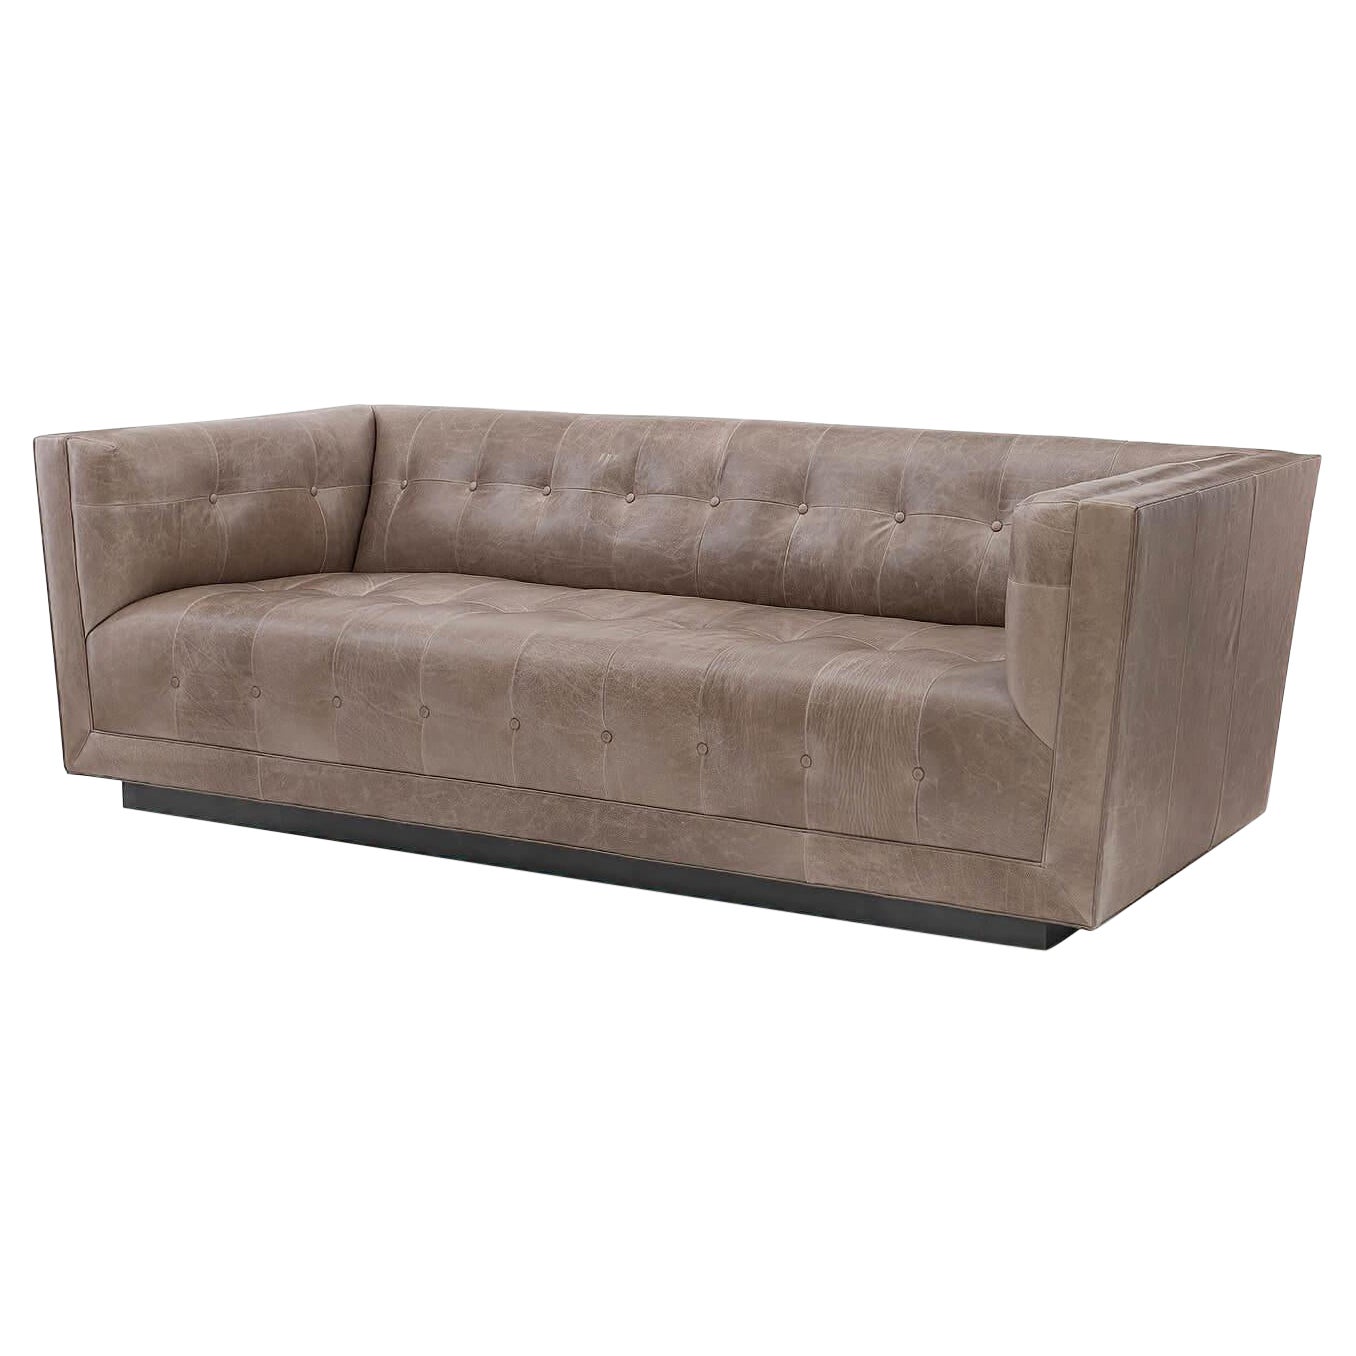 Modern Classic Beveled Leather Sofa For Sale